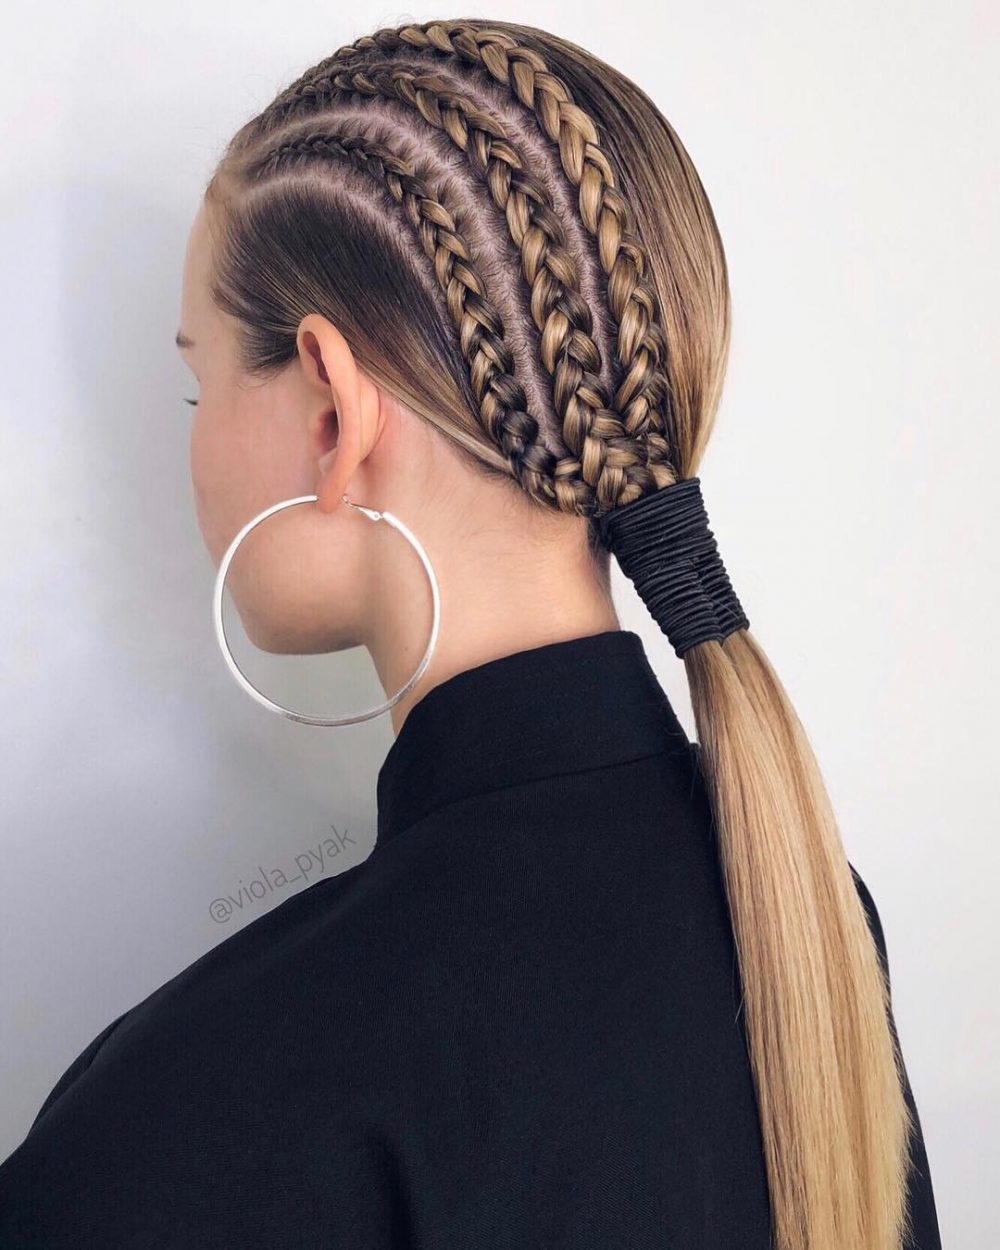 Edgy long hairstyle great for work and play